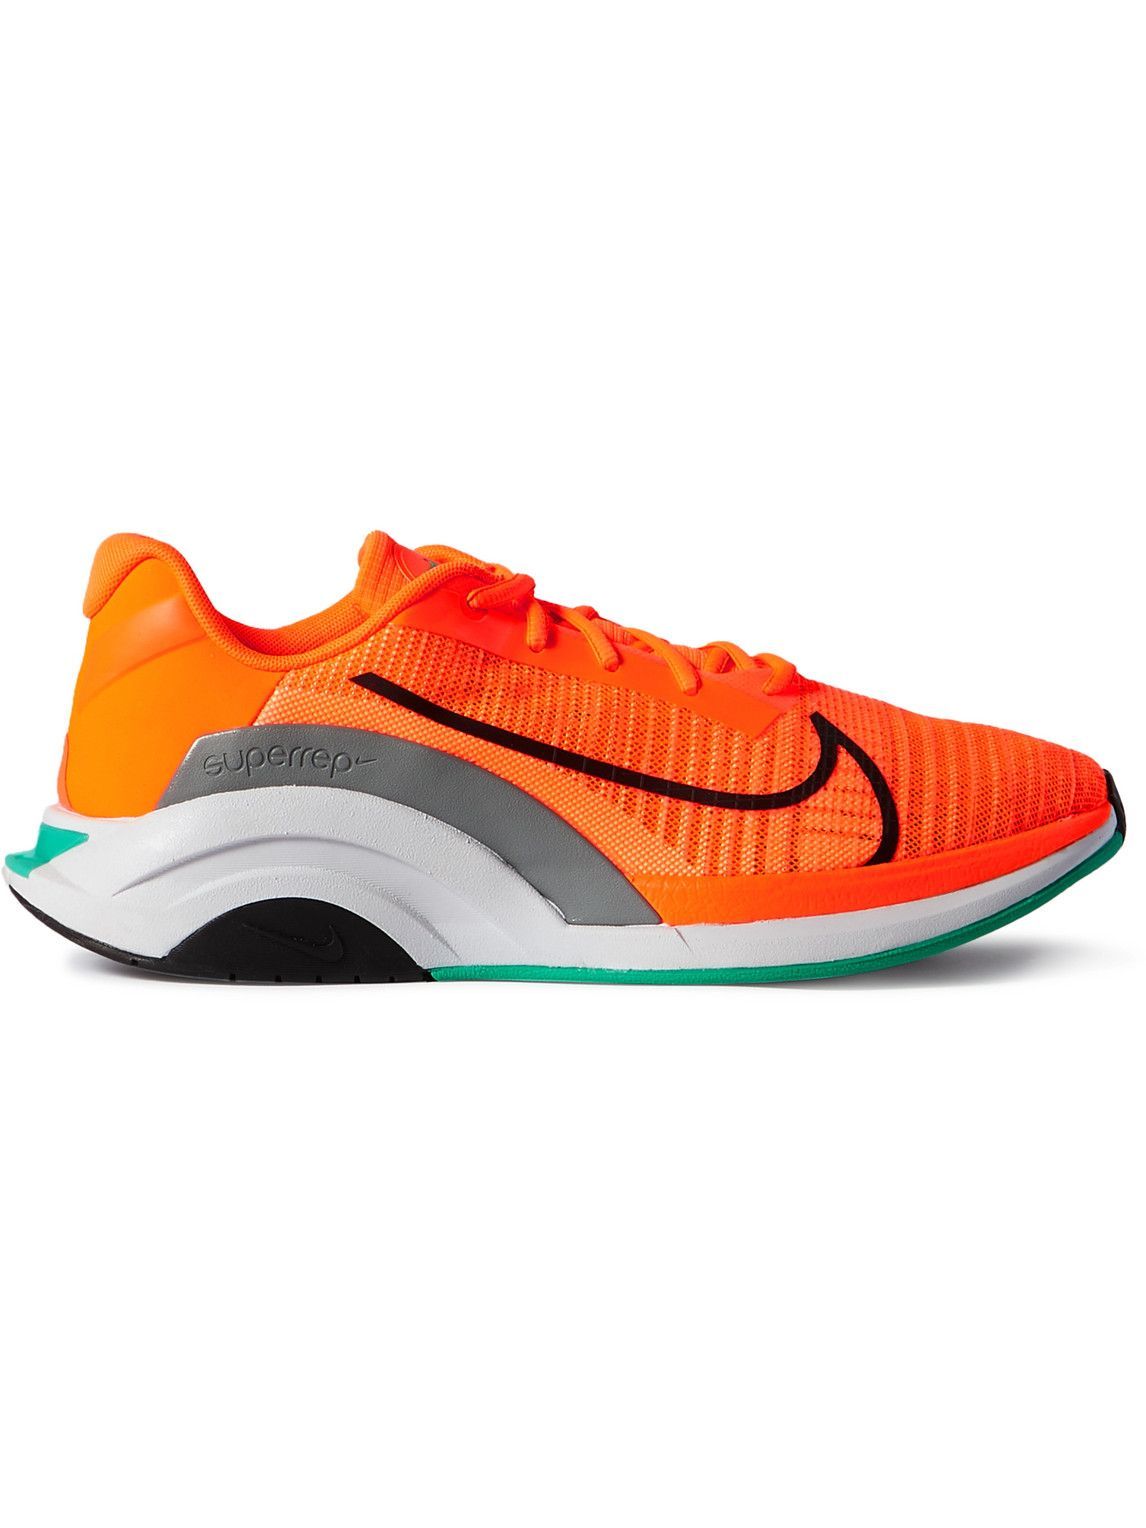 Nike Training nike zoom x super rep - ZoomX SuperRep Surge Mesh and Rubber Sneakers